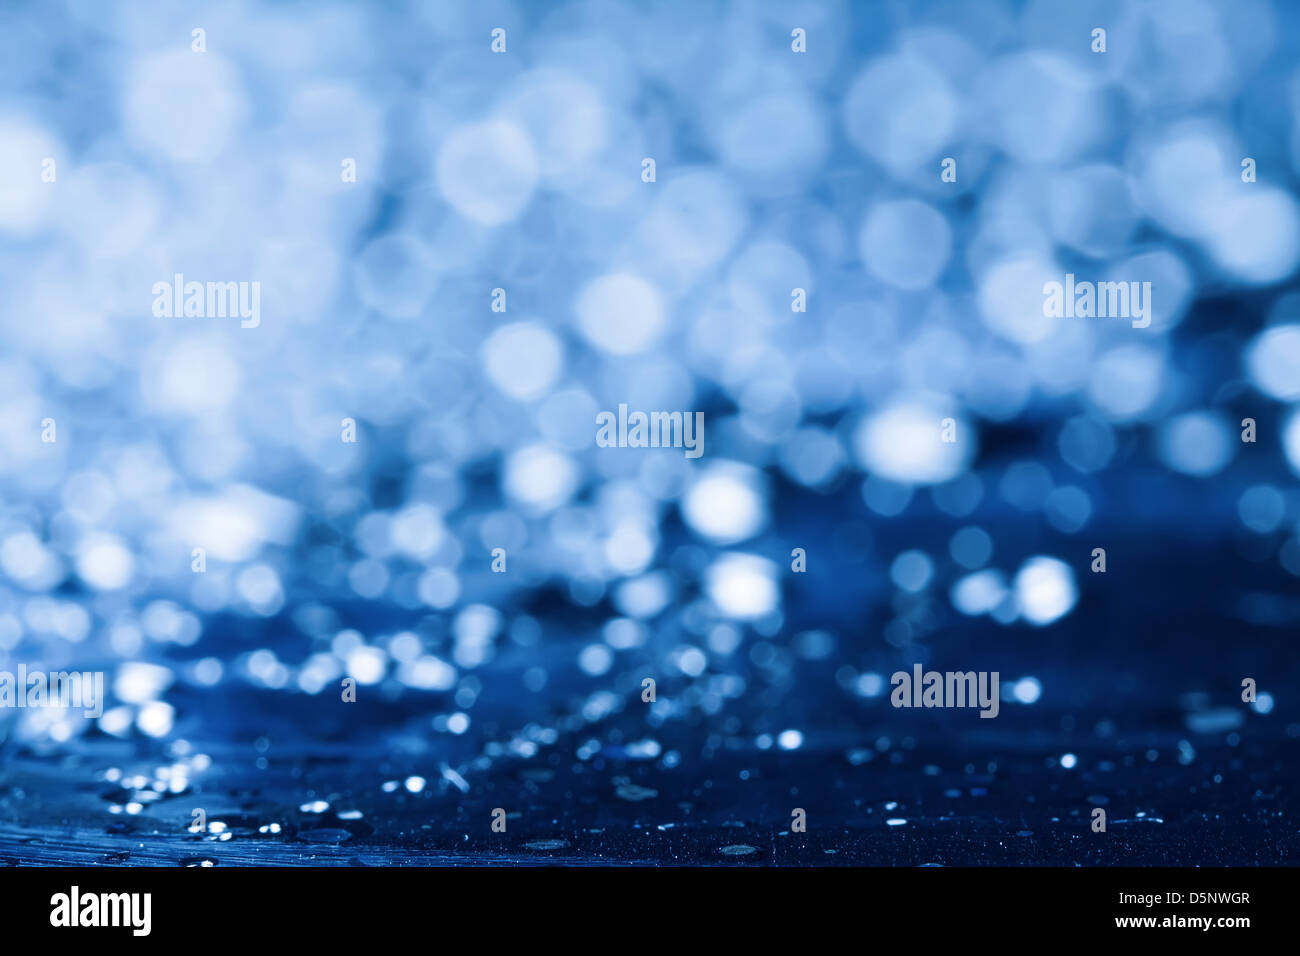 Blue water background with lens flare. Stock Photo